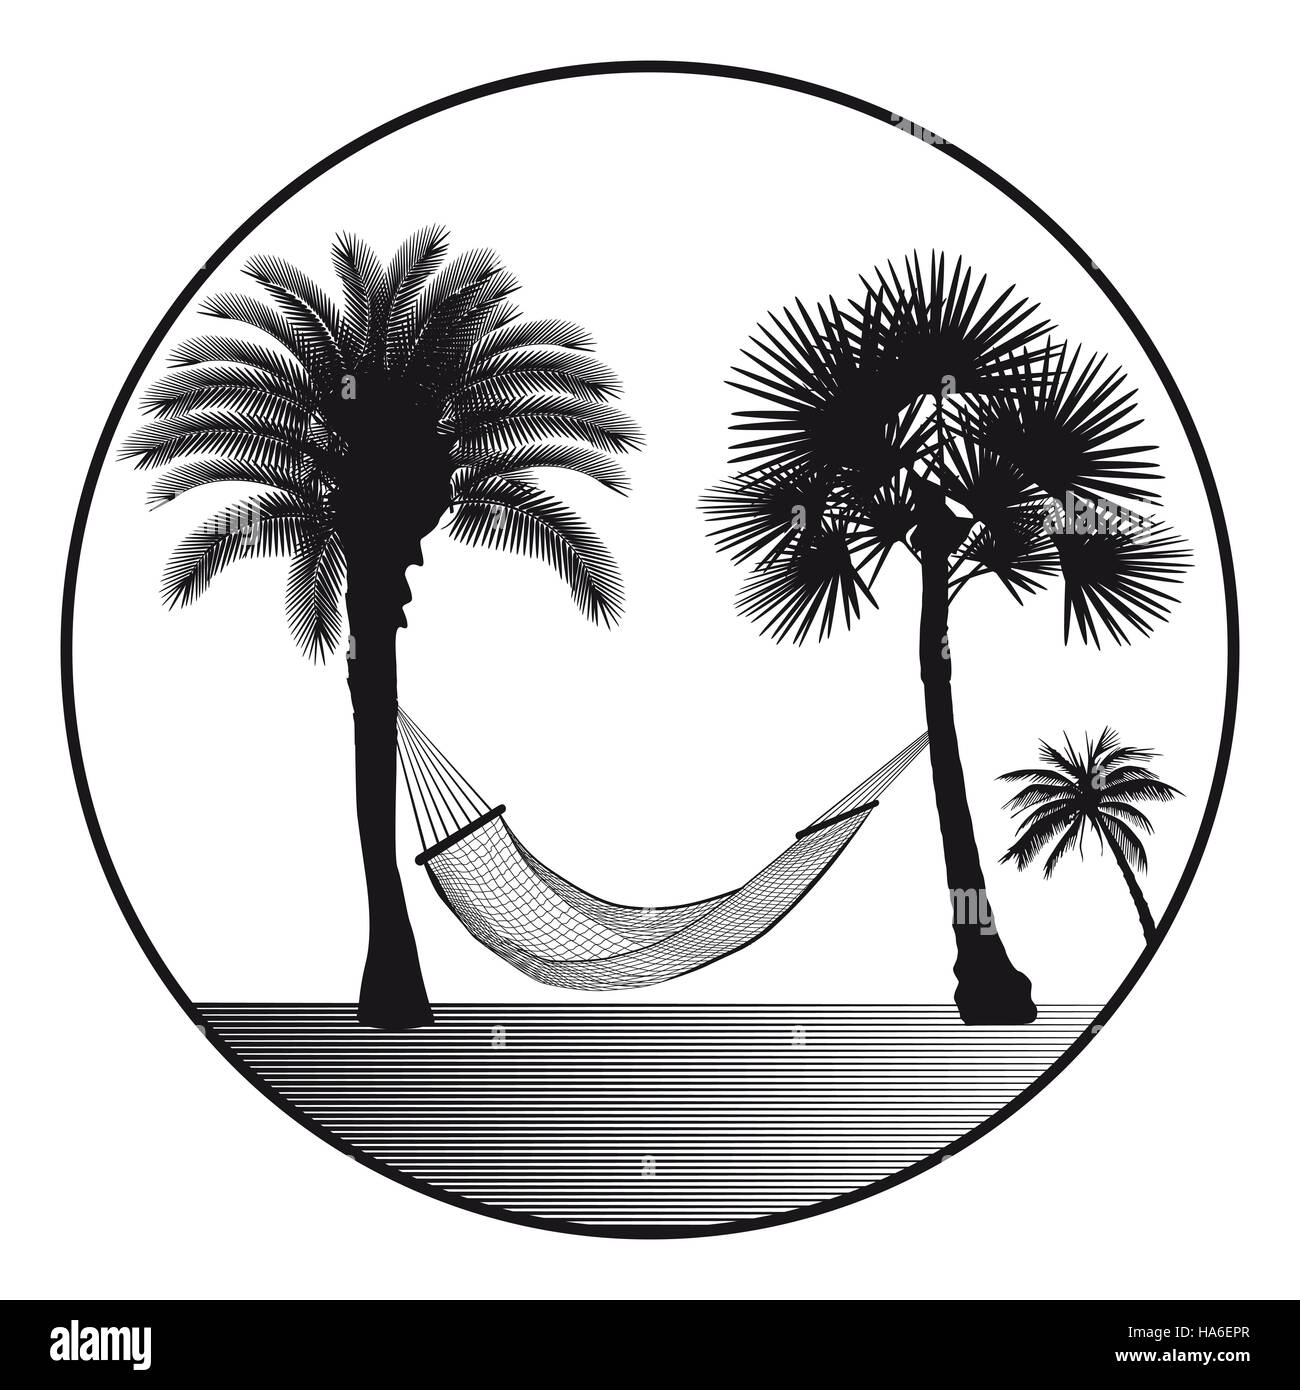 Palm with hammock characters Stock Photo